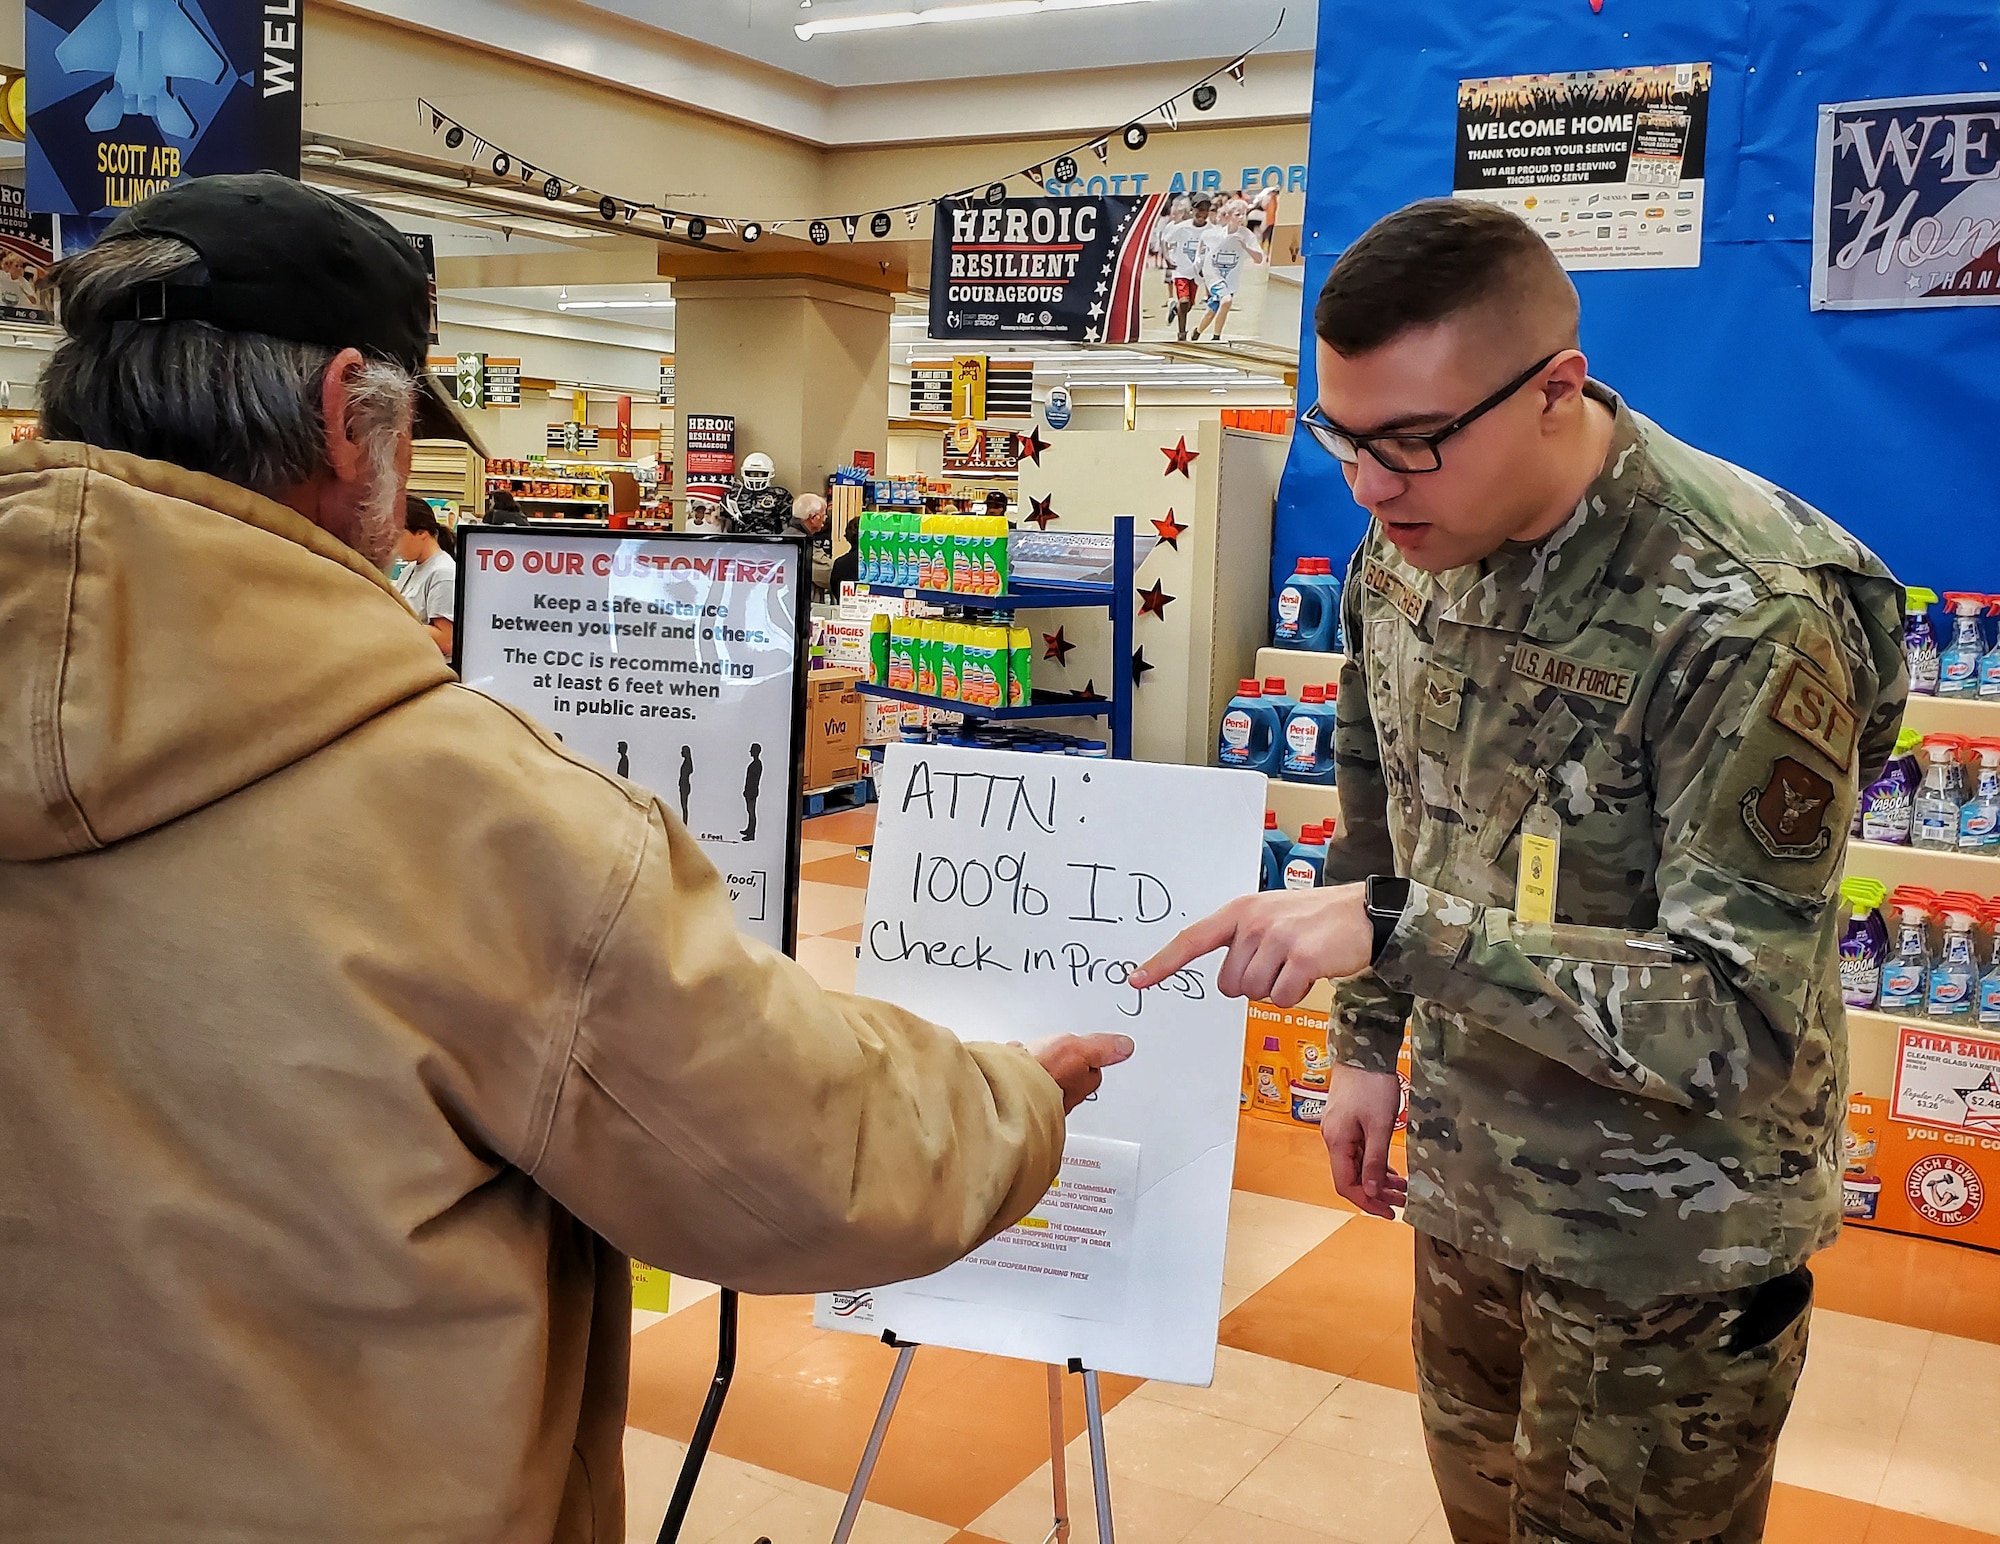 Senior Airman Austen Boettcher, from the 932nd Security Forces Squadron, volunteers to check IDs at the Scott Air Force Base commissary March 20, 2020. (U.S. Air Force photo by Christopher Parr)